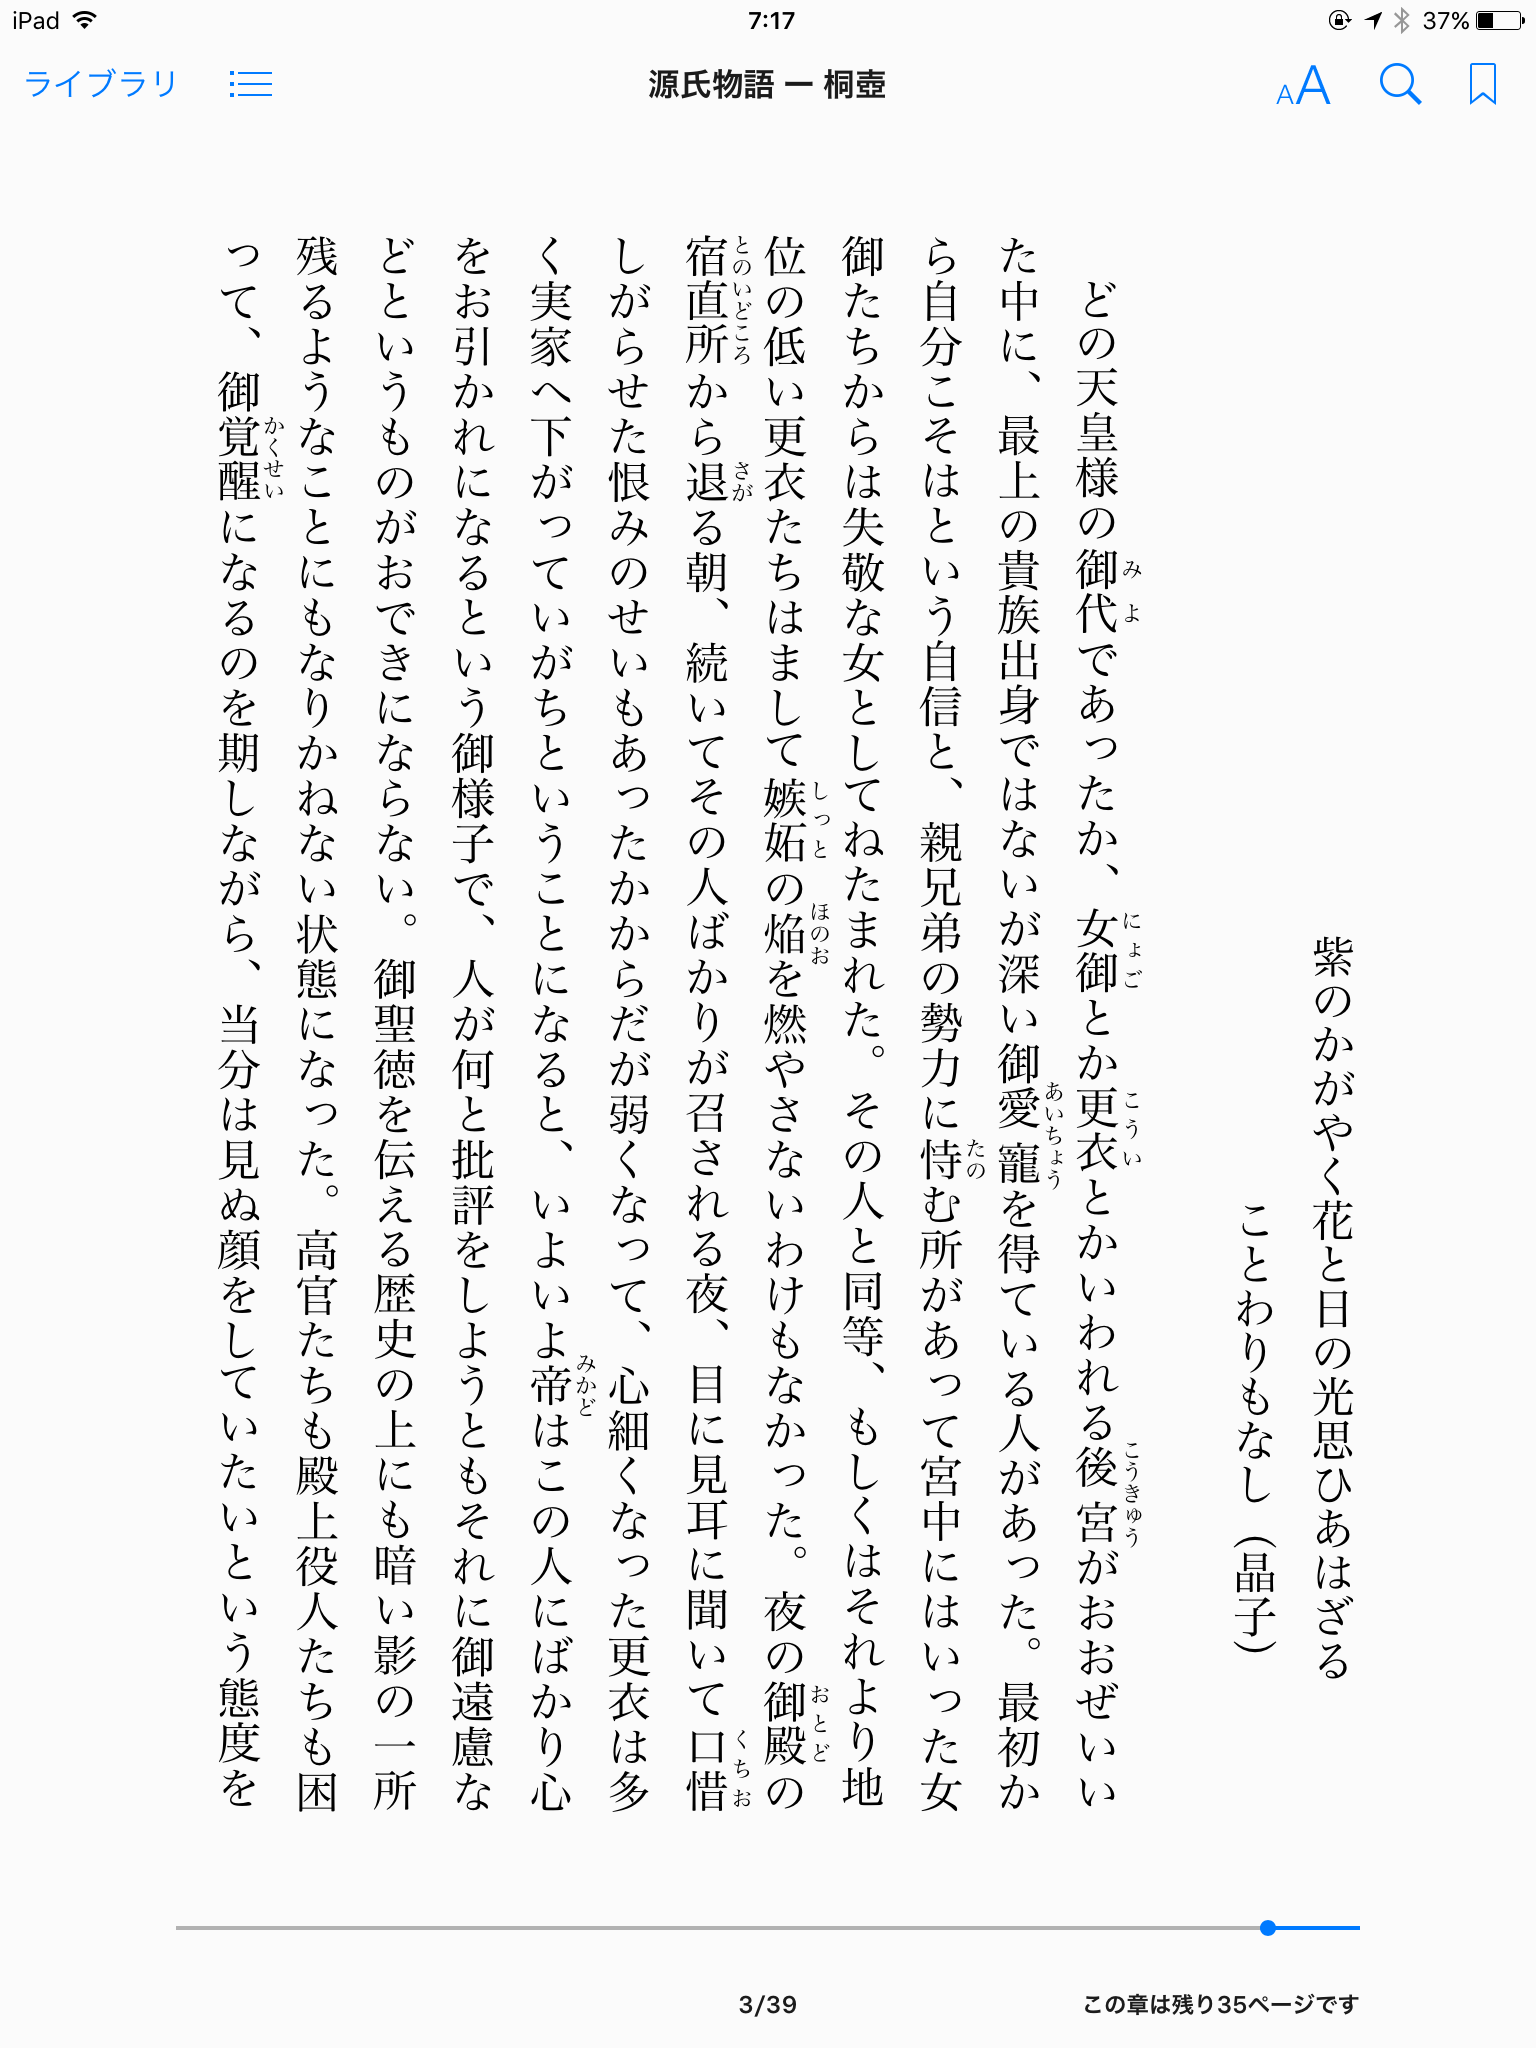 An extract a text in Japanese, written in vertical